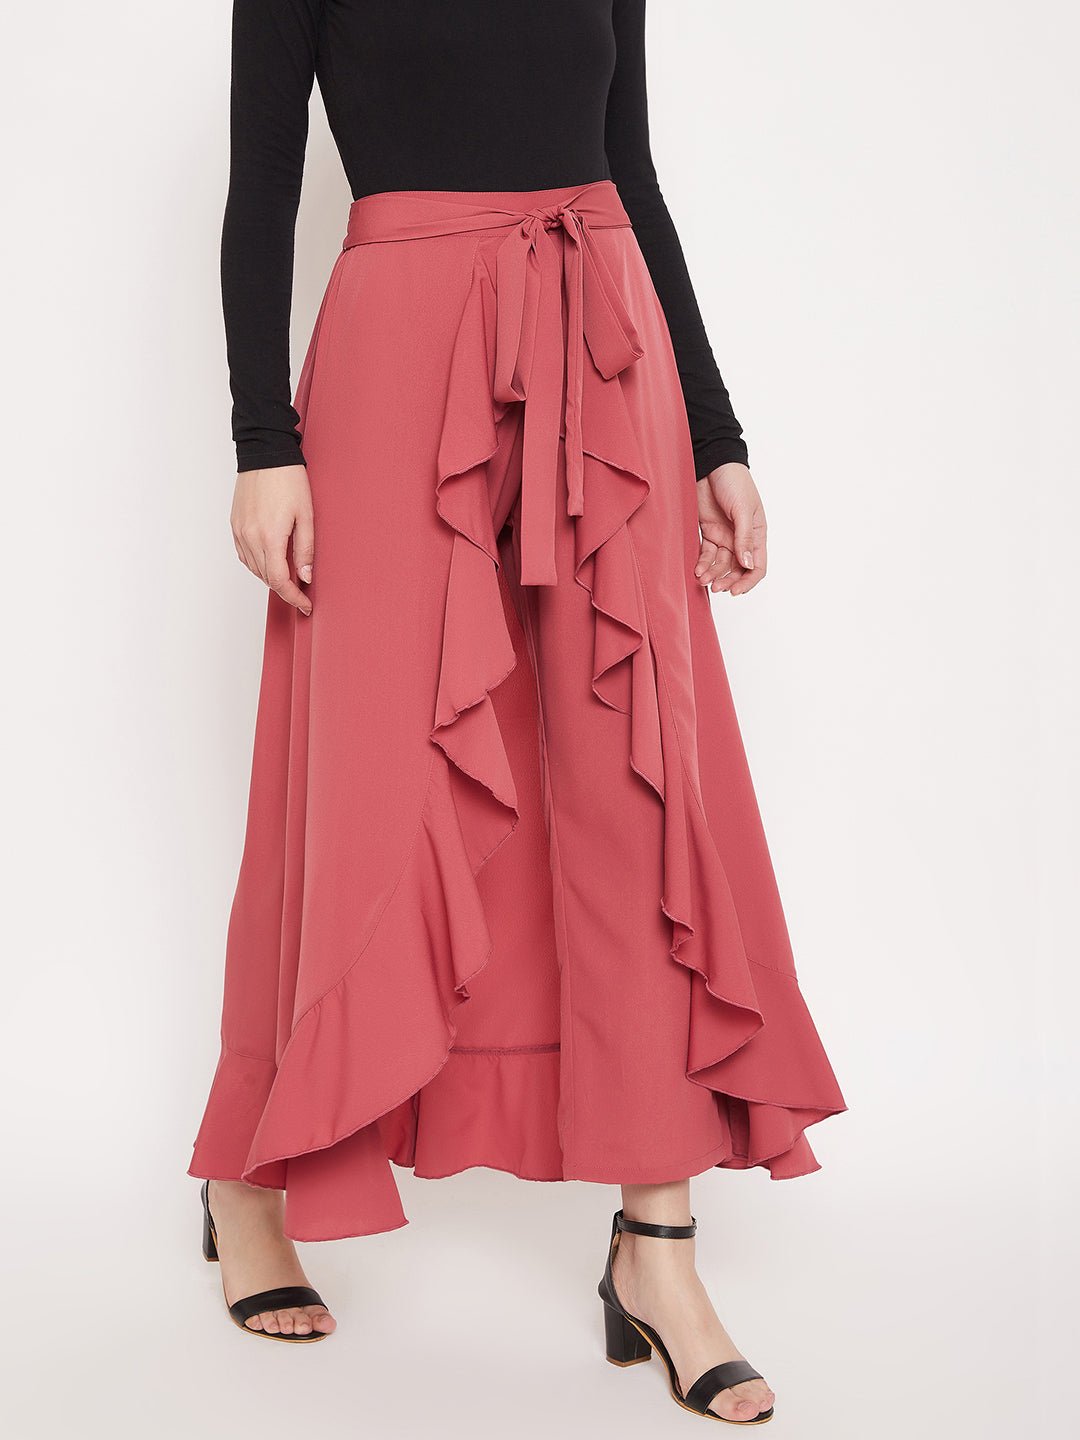 Folk Republic Women Solid Pink Waist Tie-Up Ruffled Maxi Skirt With Attached Trousers - #folk republic#